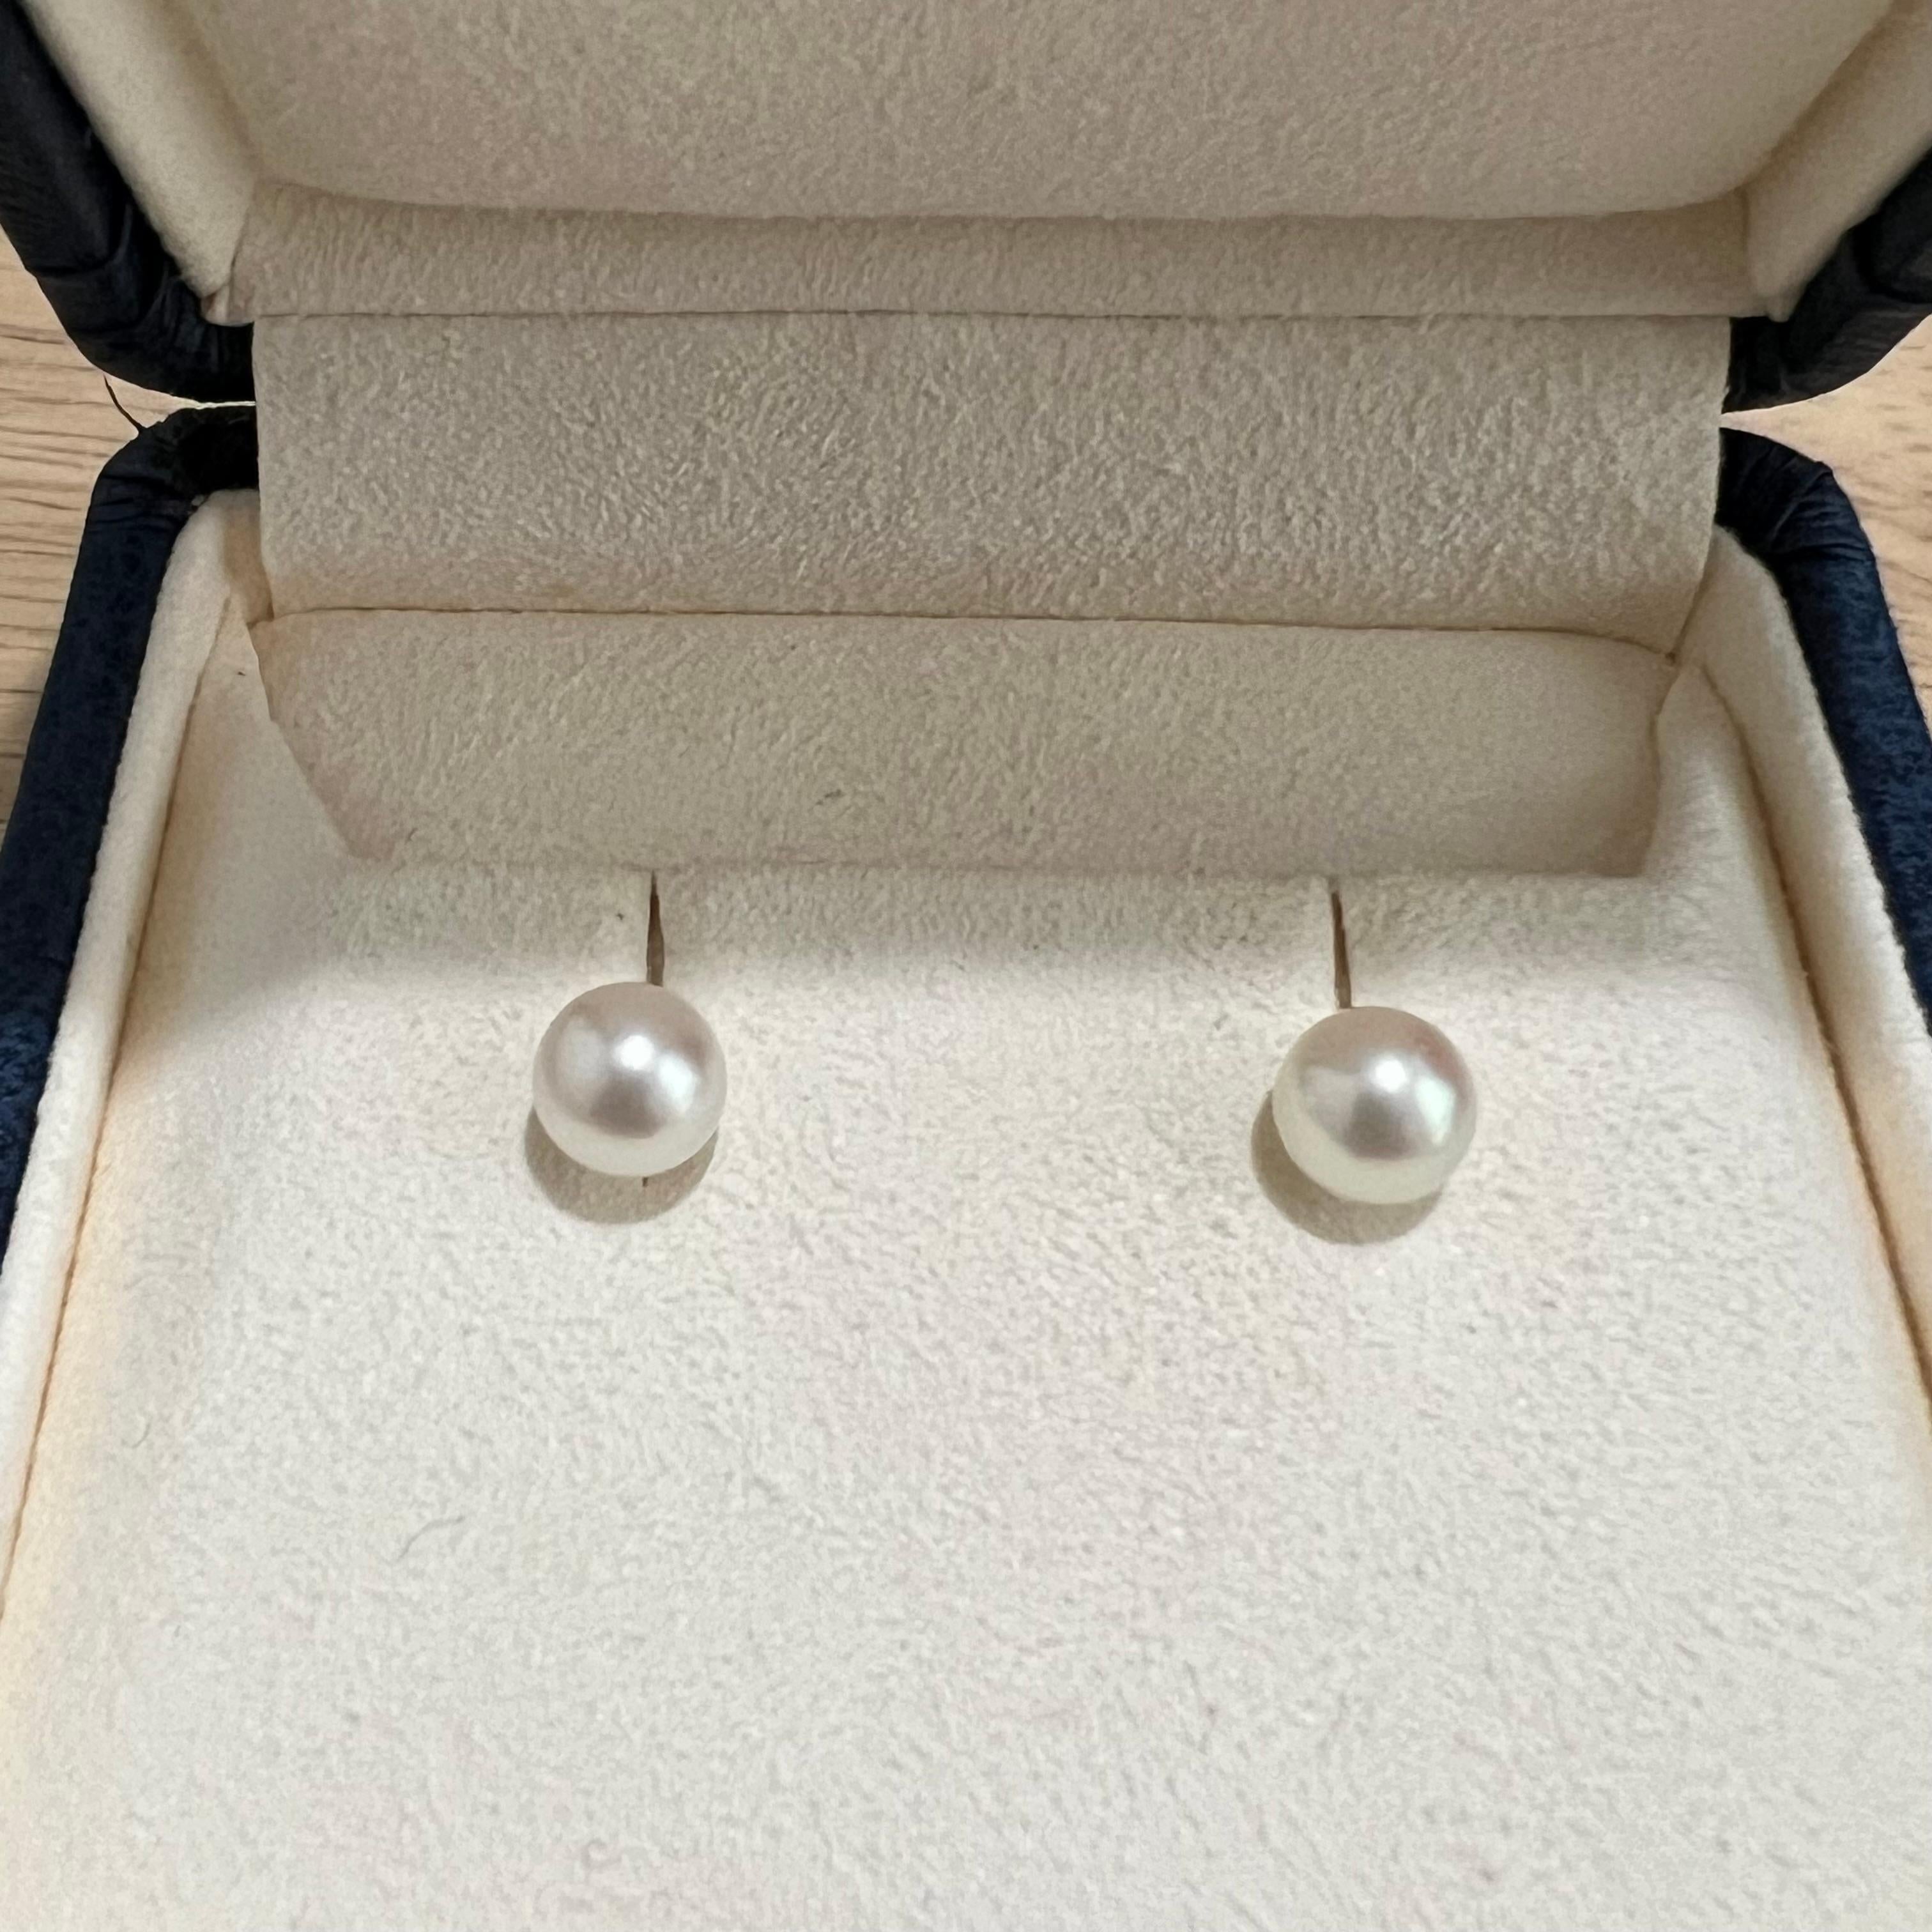 Item: Authentic Mikimoto Akoya Pearl Post Earrings
Stones: 6.5 mm Akoya Pearl
Metal: 18K White Gold
Measurement: 0.65 cm
Weight: 1.8 Grams (total)
Condition: Used
Retail Price: ---
Signatures: MIKIMOTO, K18
Accessories: Box (as shown in the